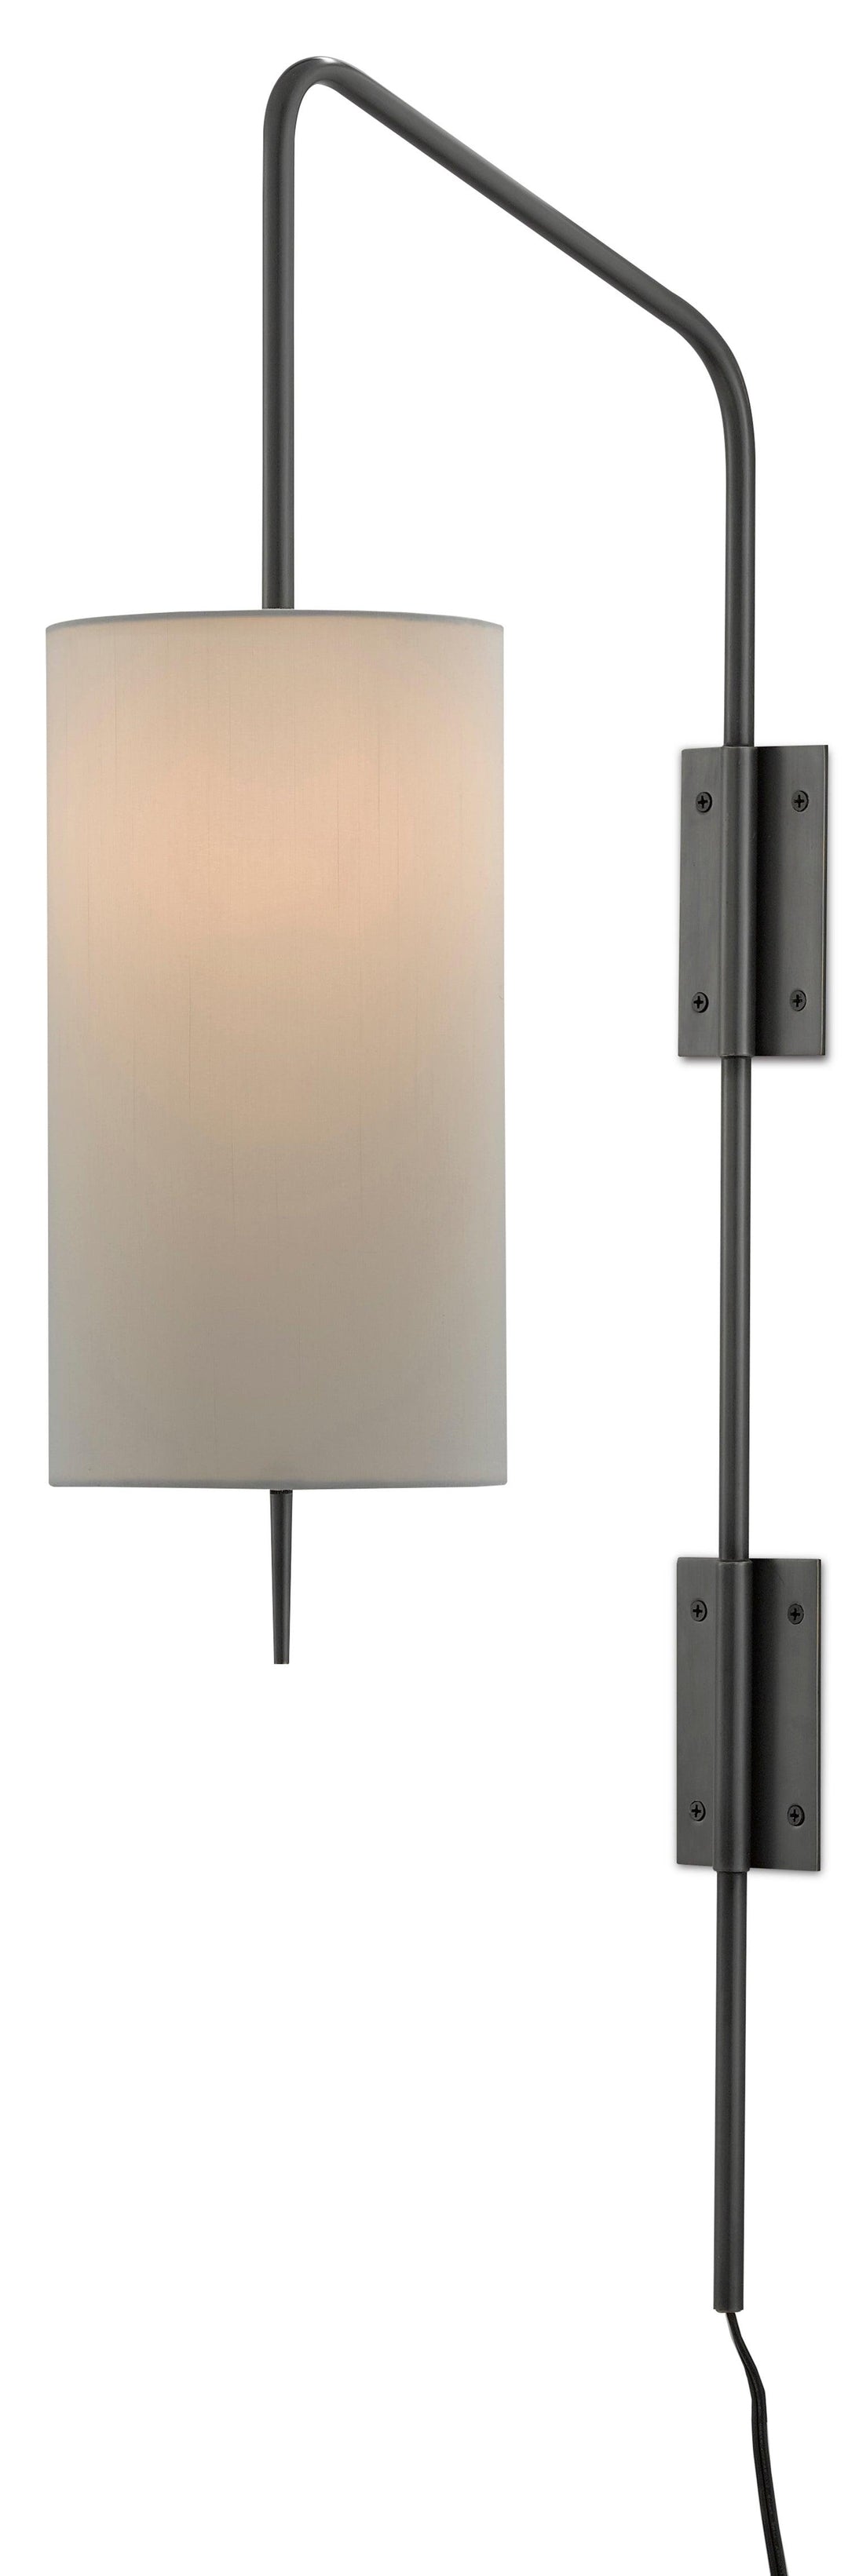 Tamsin Wall Sconce - Casey & Company